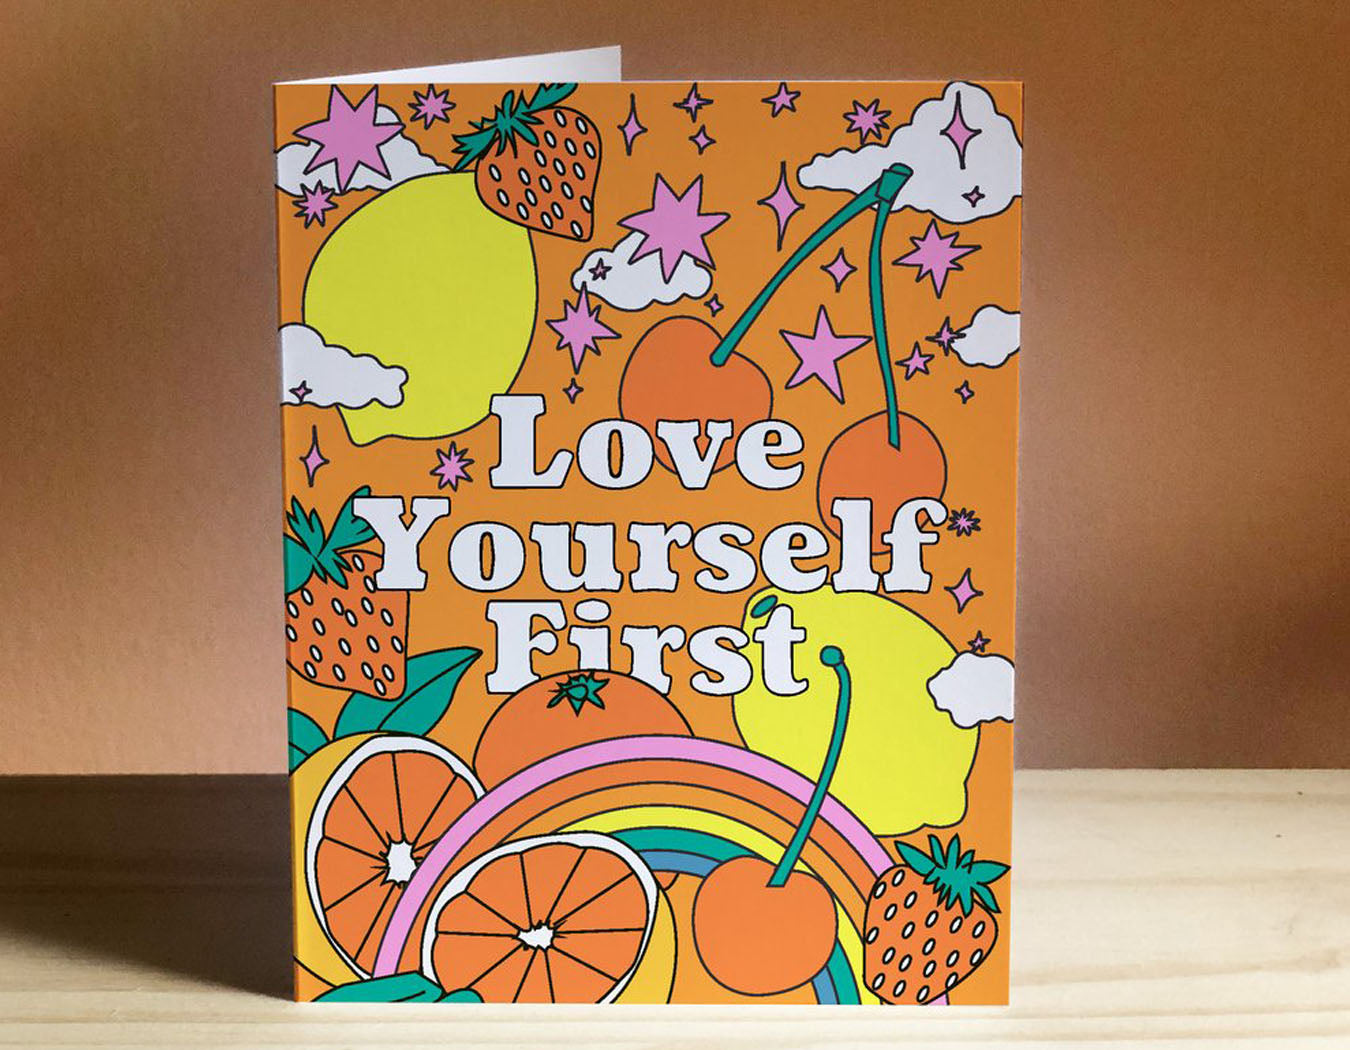 orange background strawberries lemons cherries rainbow stars clouds text reads love yourself first